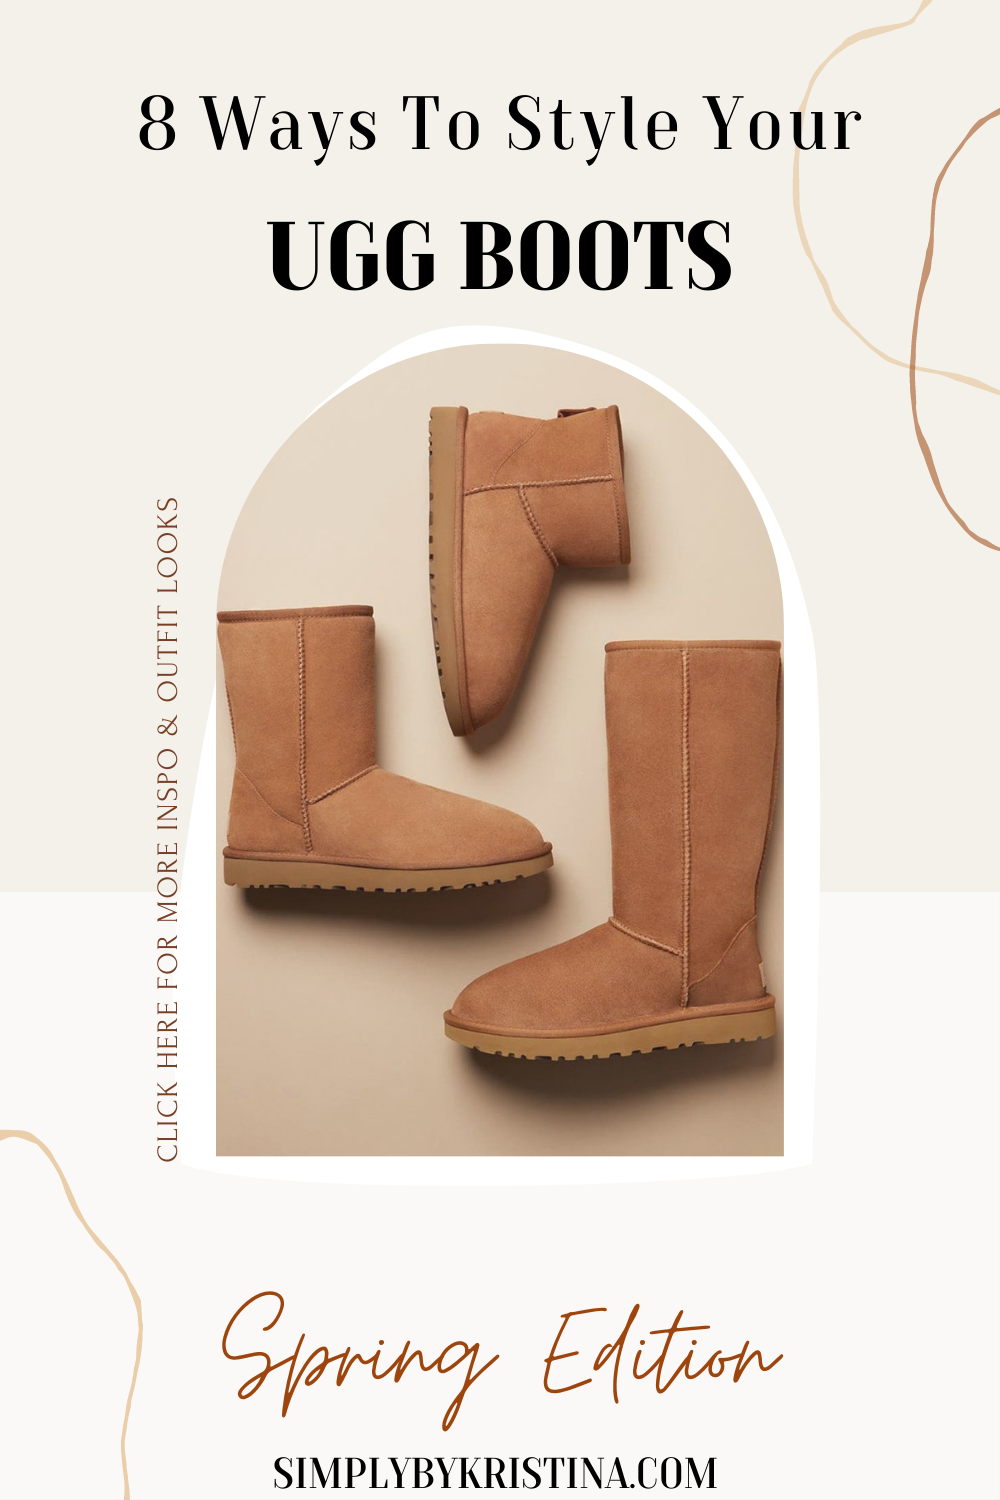 6-ways-to-style-UGG-boots-featured-image-for-spring-edition